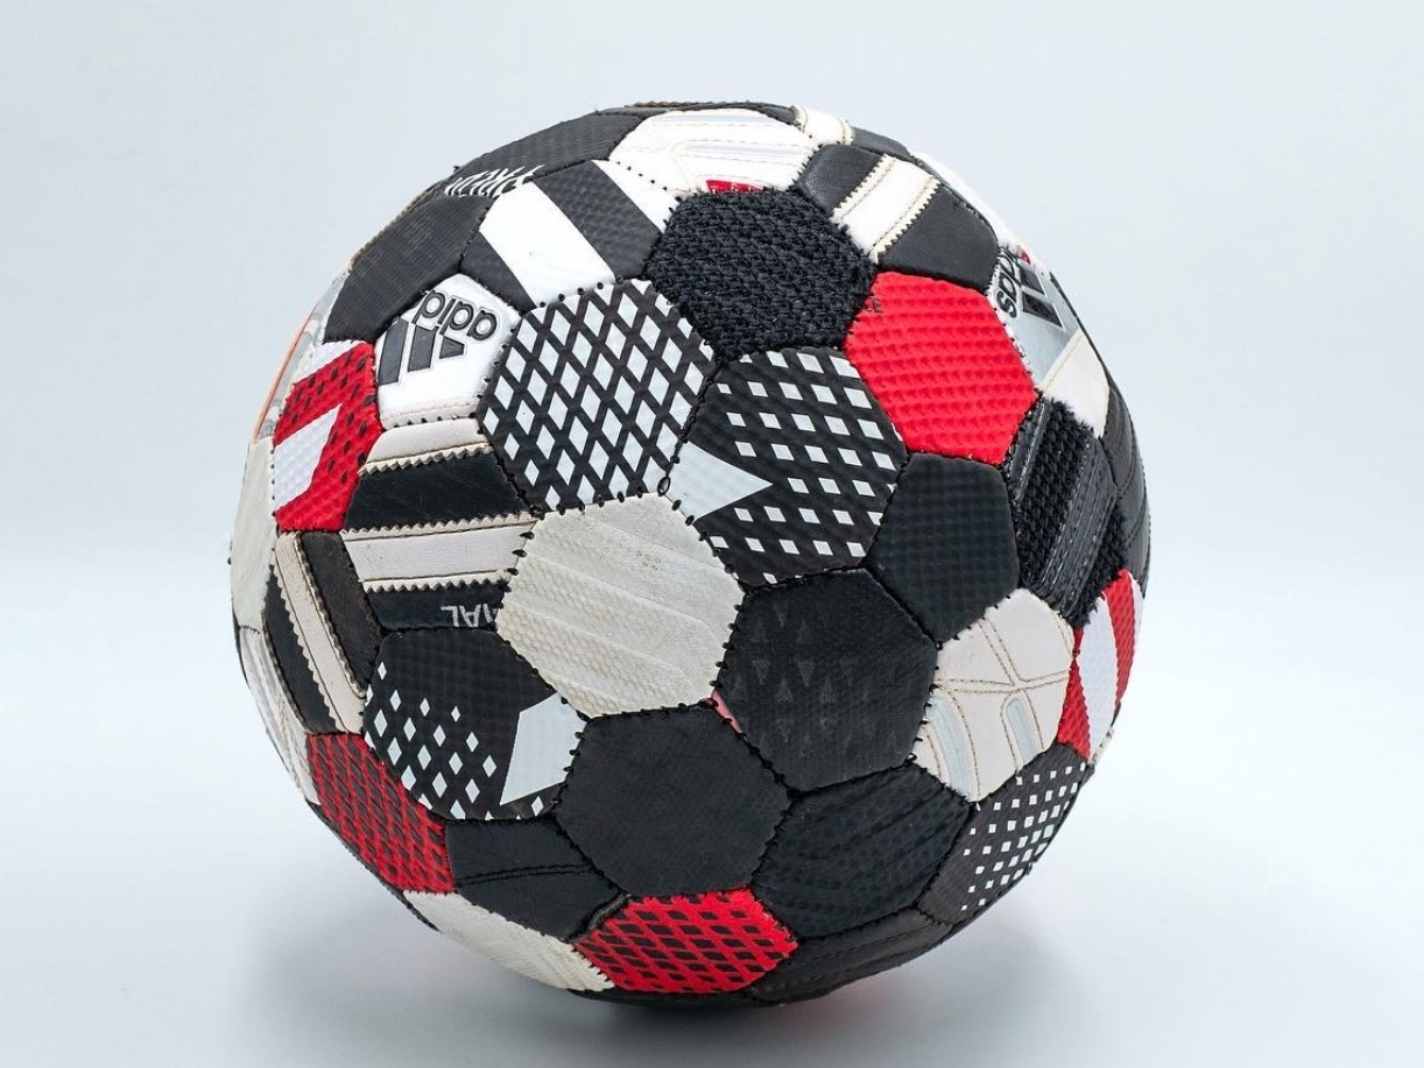 The world’s first football made entirely out of Adidas Predator boots